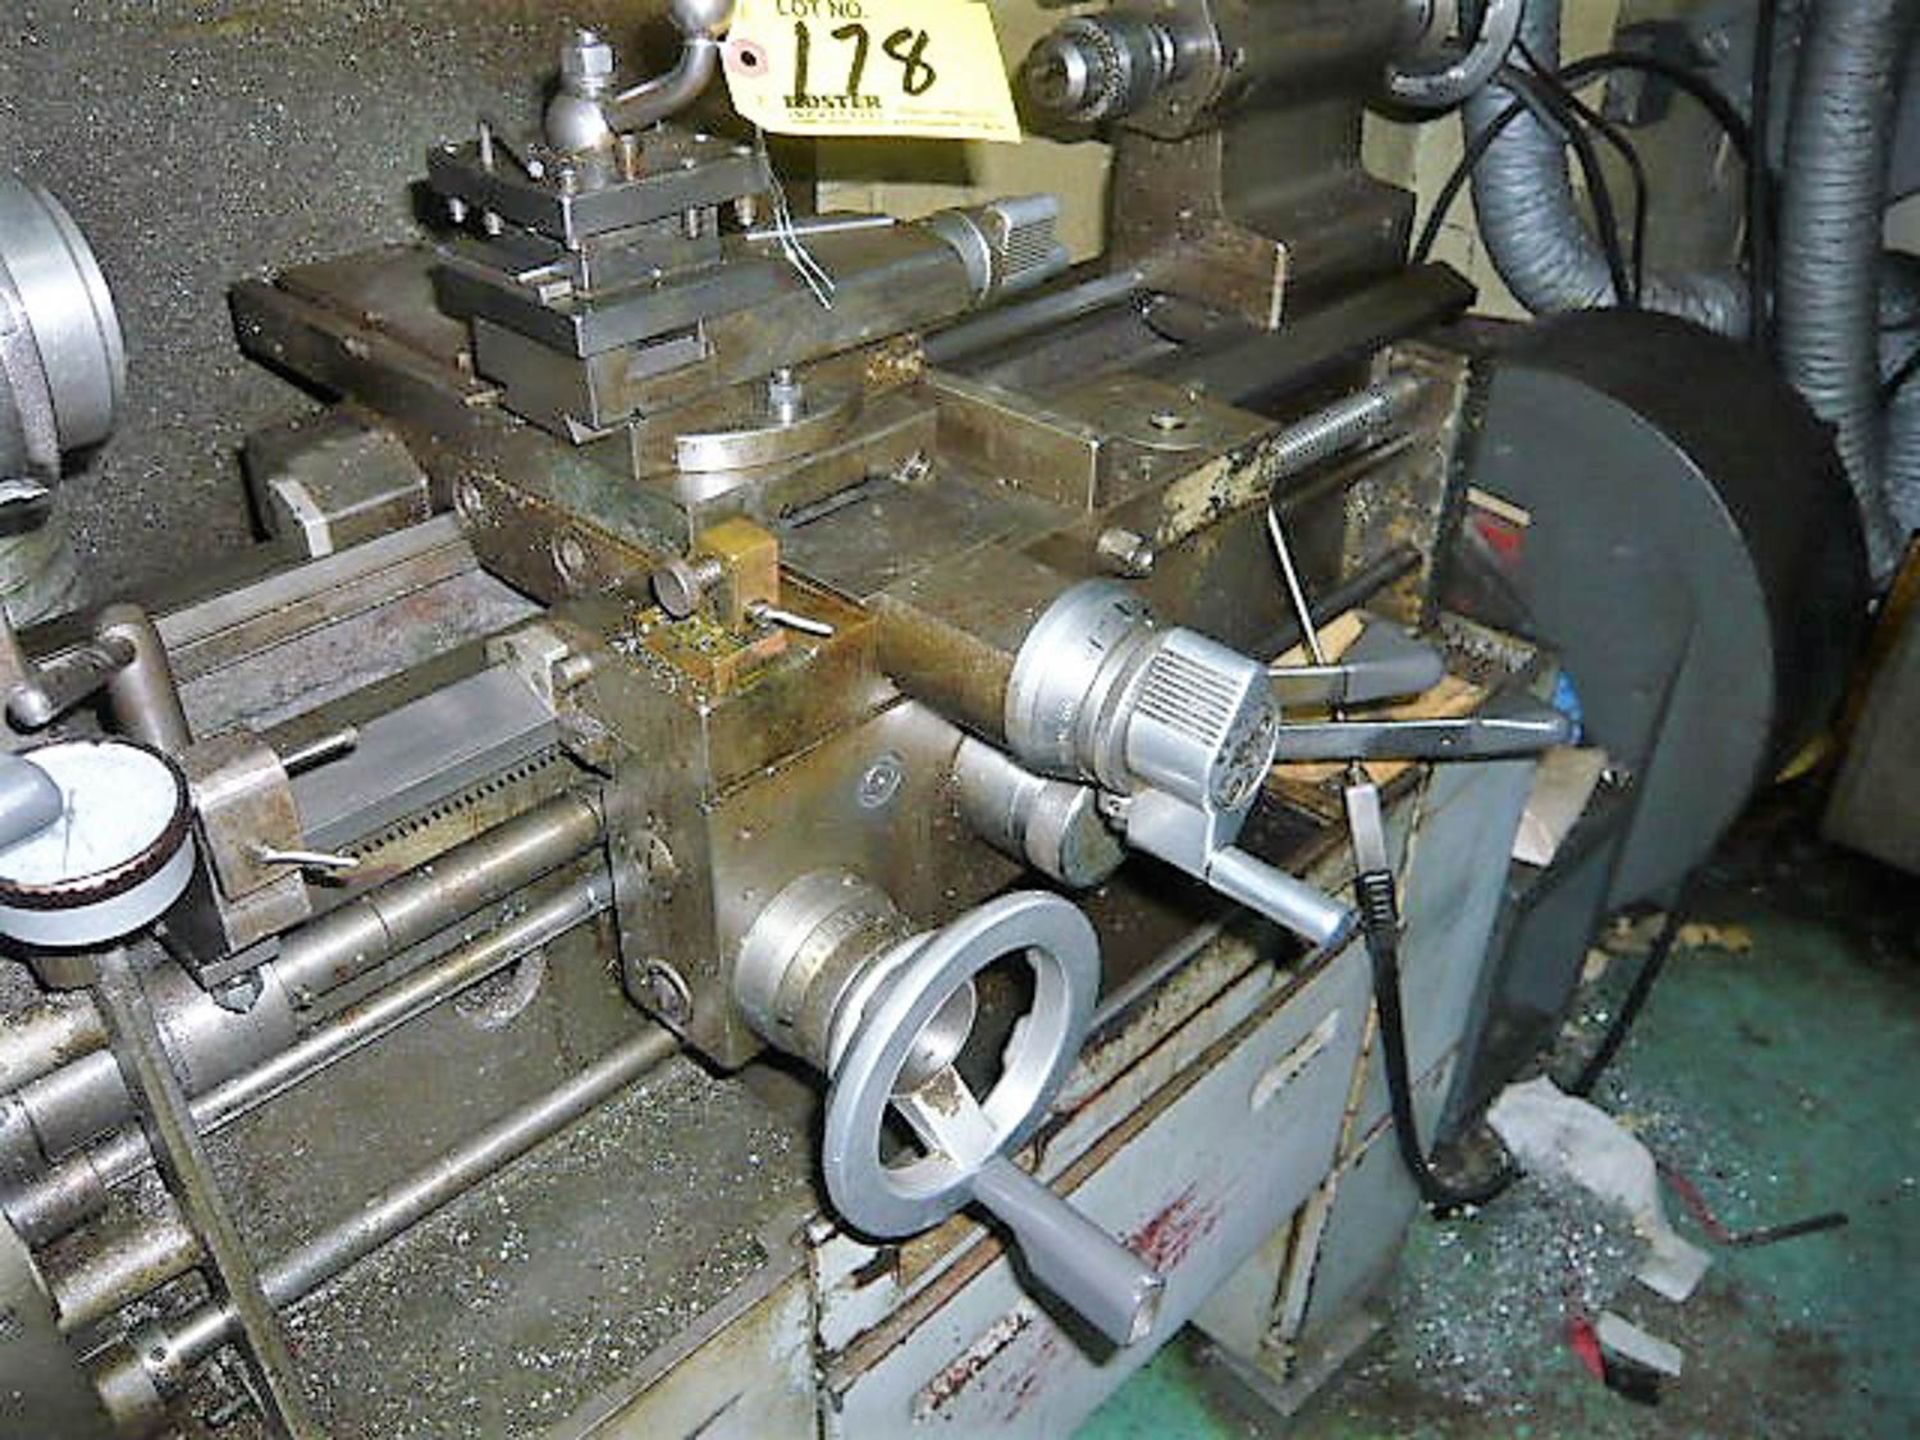 MADE IN BELGIUM 12" X 20" LATHE, INCH / METRIC THREADING, TOOL POST, 5C COLLET CHUCK, 6" 3-JAW - Image 3 of 6